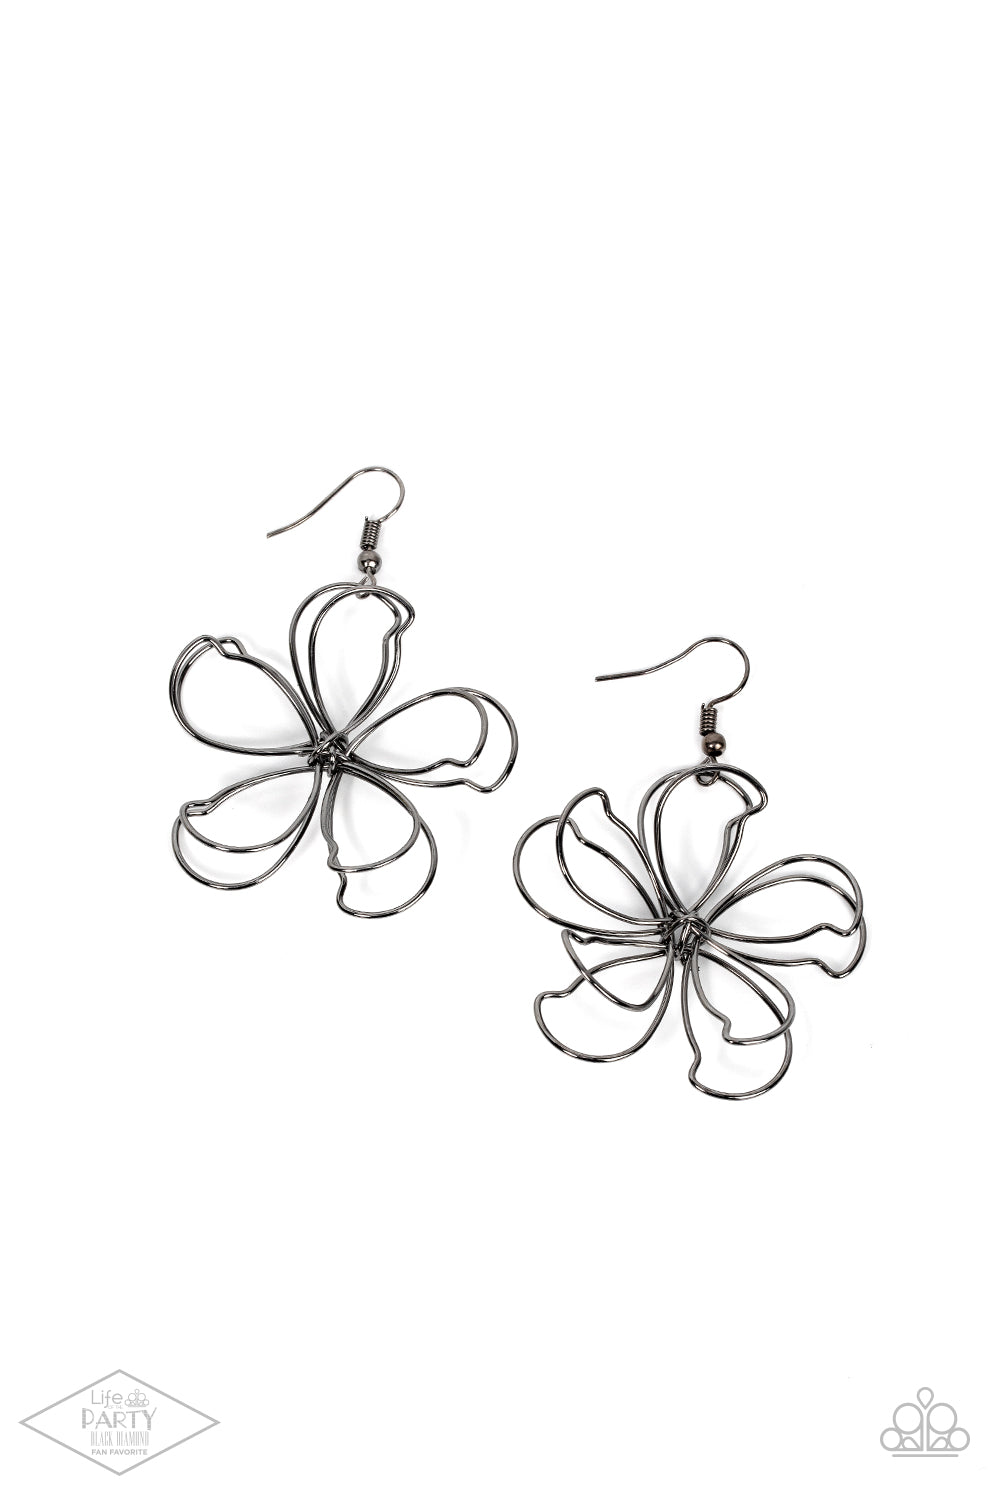 Miss Daisy - Gunmetal - Black Metal - Large Flower Earrings - Paparazzi Accessories - Intricate wires with a gunmetal finish are shaped like petals and knotted in the center to create a delicate silhouette of a daisy. Earring attaches to standard fishhook fittings.